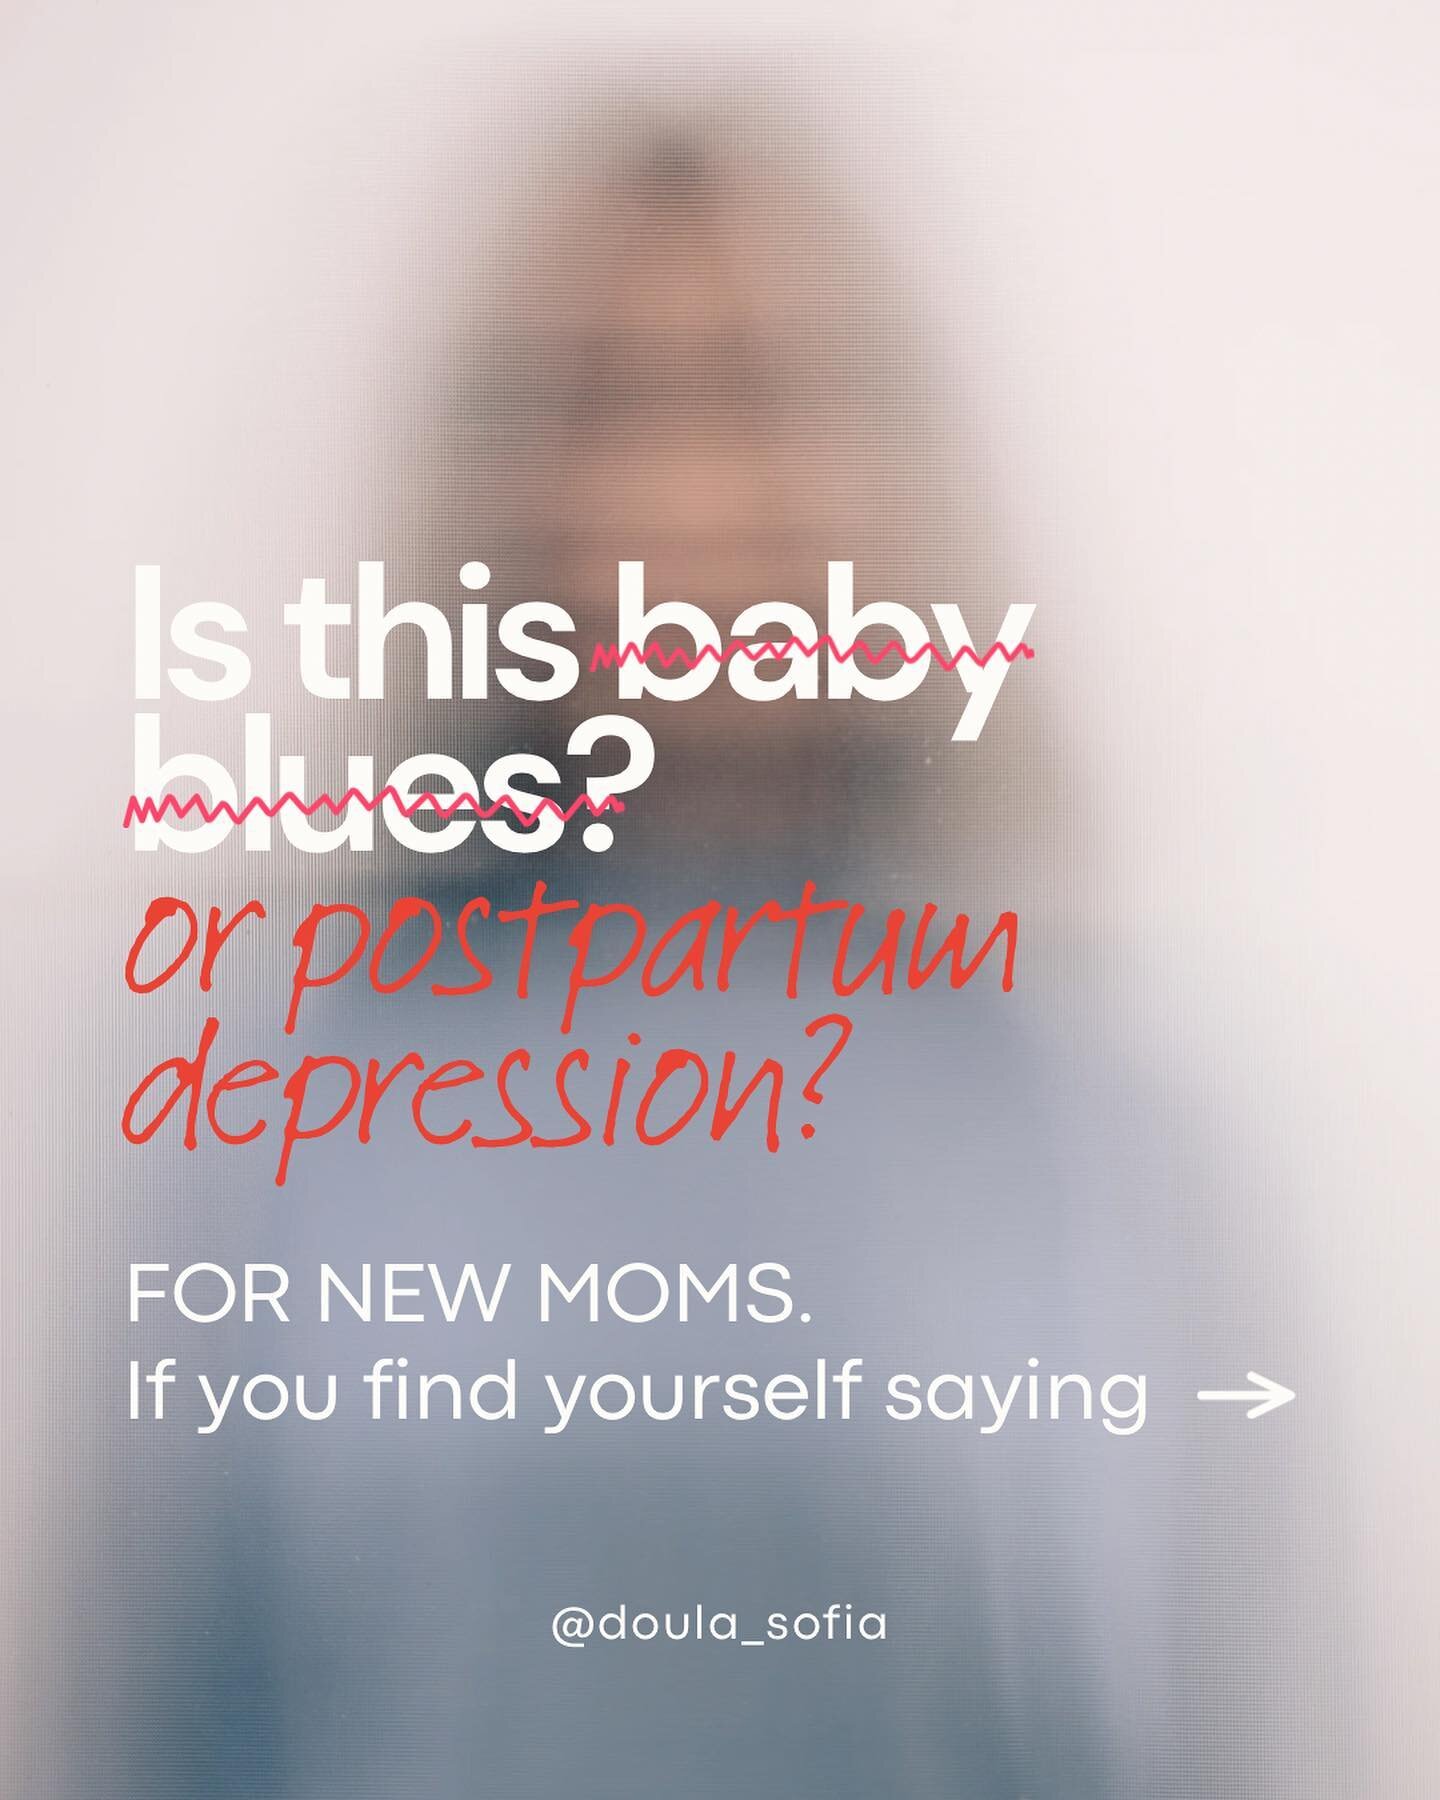 Symptoms of depression after childbirth vary, and they can range from mild to severe. If you are struggling after childbirth, it may be baby blues, but may also be something more serious. 

Symptoms of baby blues last no longer than a couple weeks af